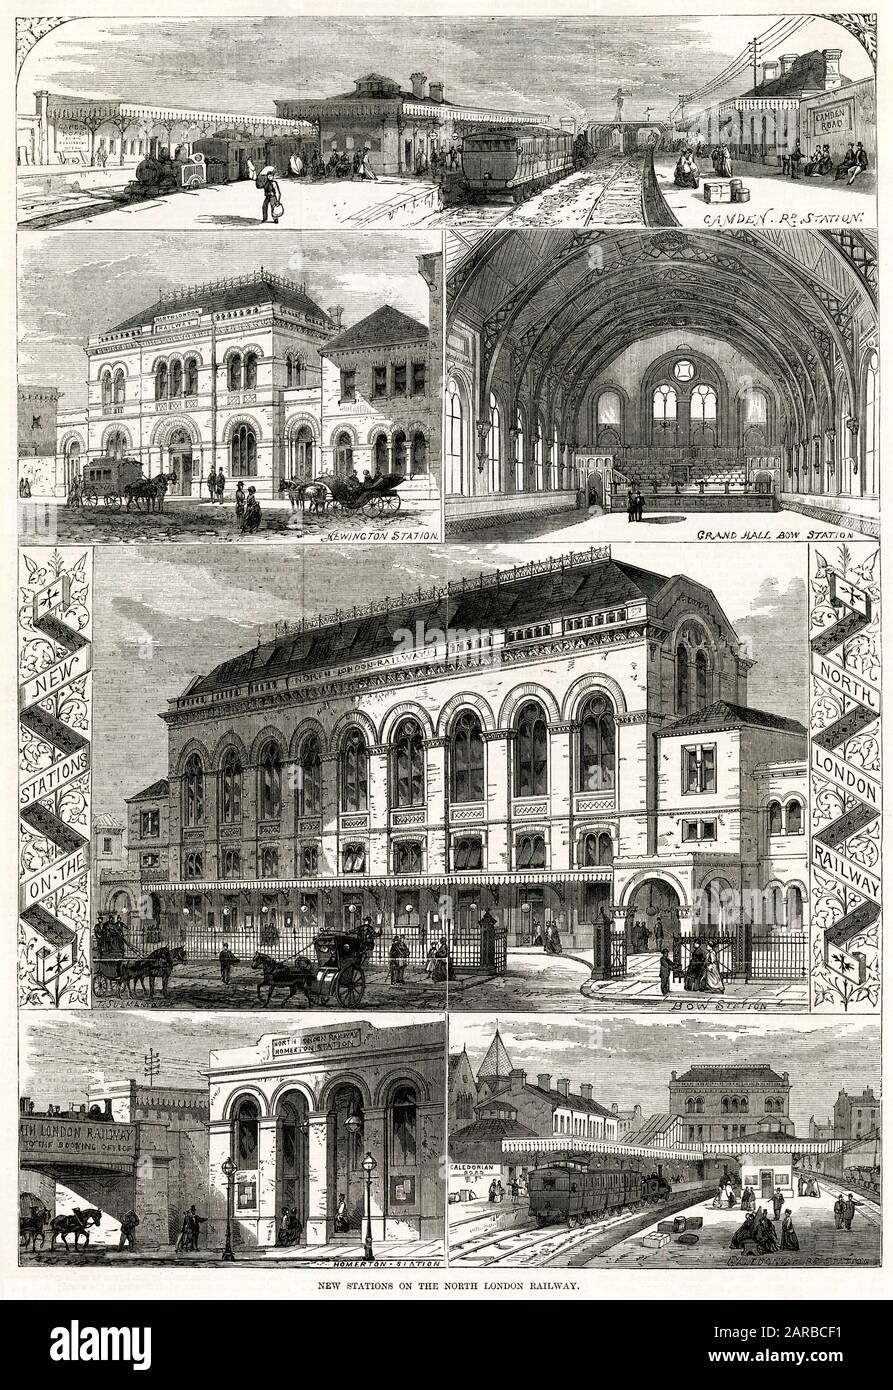 New stations on the North London railway 1870 Stock Photo